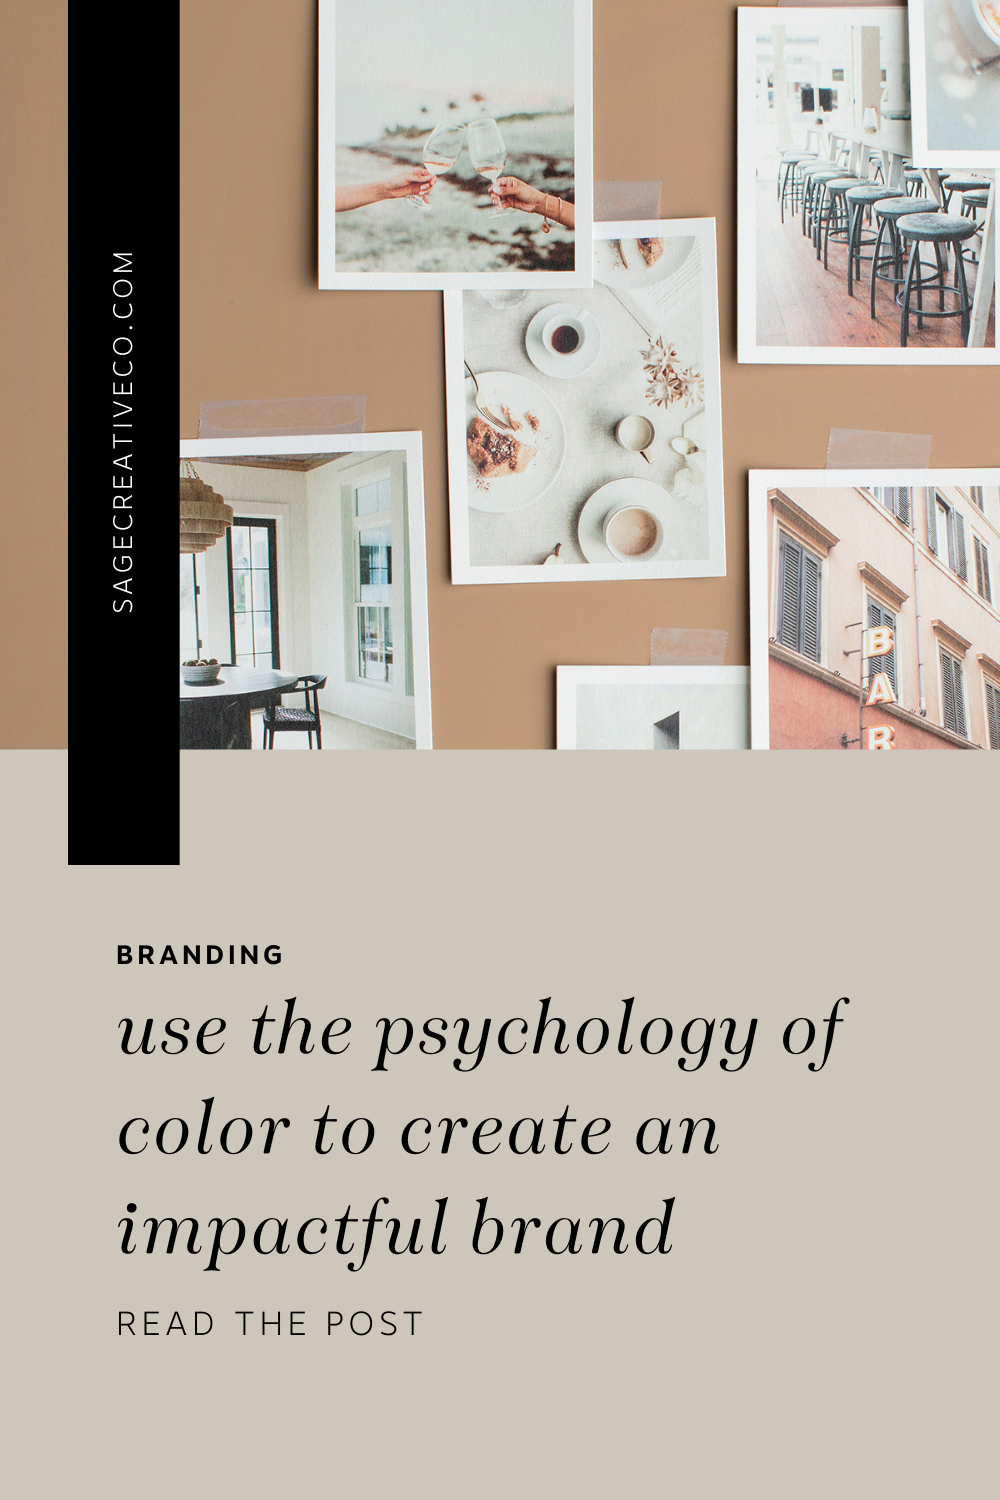 Colors have specific emotions associated with them, so make sure your brand elements are conveying the right feelings by using the psychology of color when making decisions about your brand’s colors.